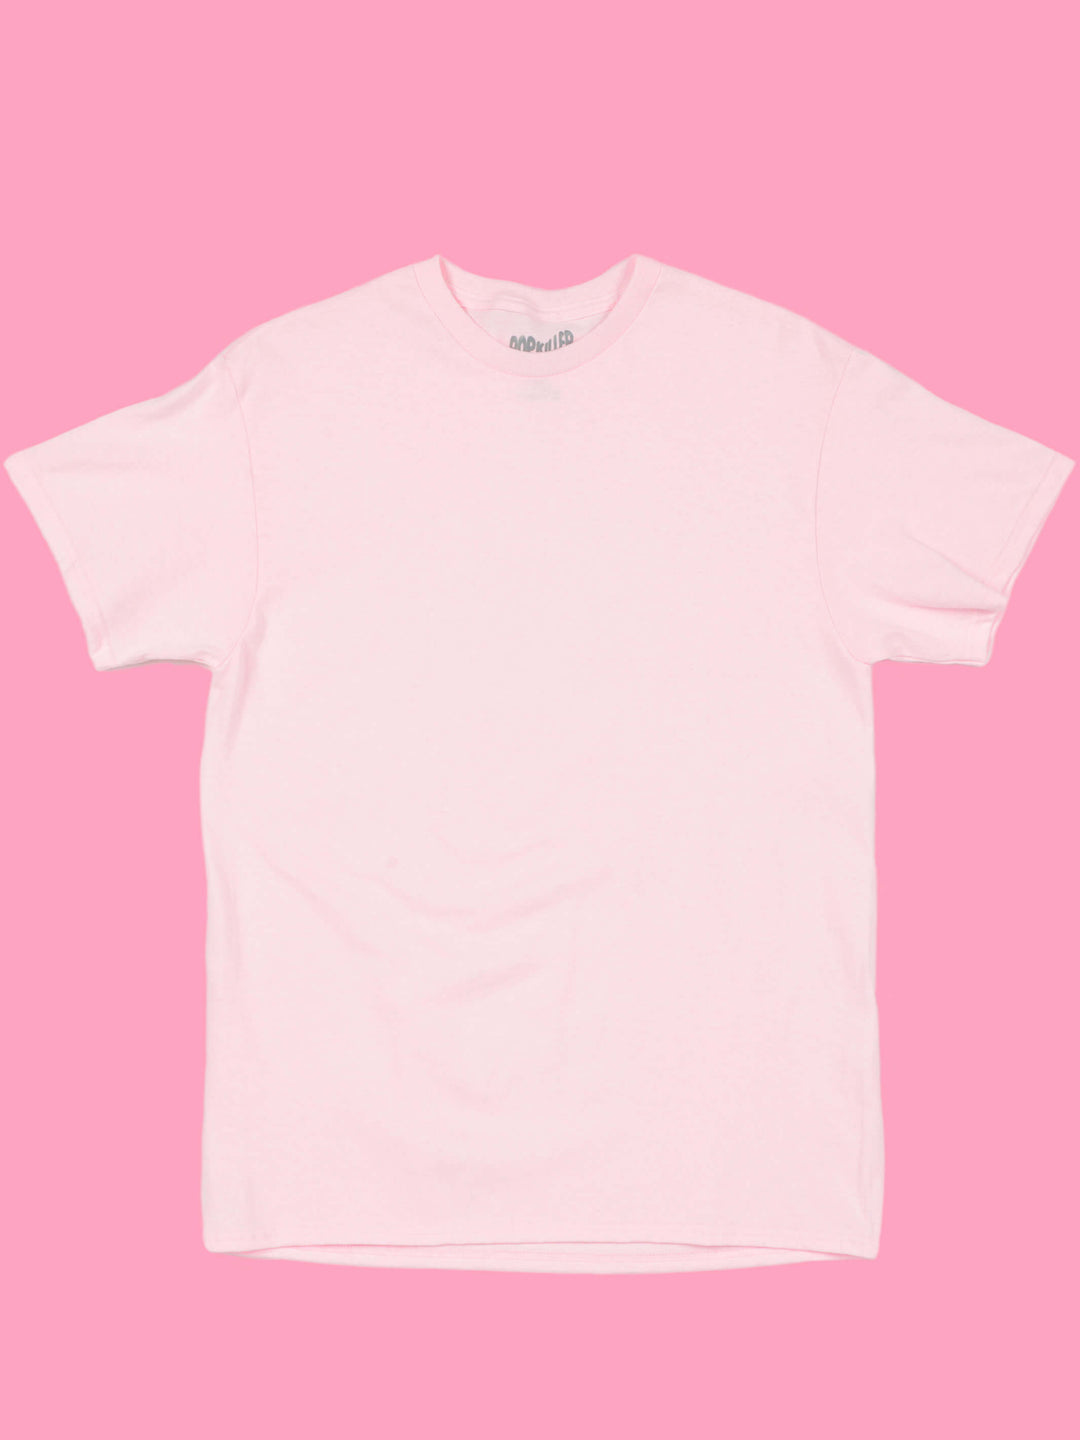 Print your own design on Popkiller's Unisex pink colored t-shirt!